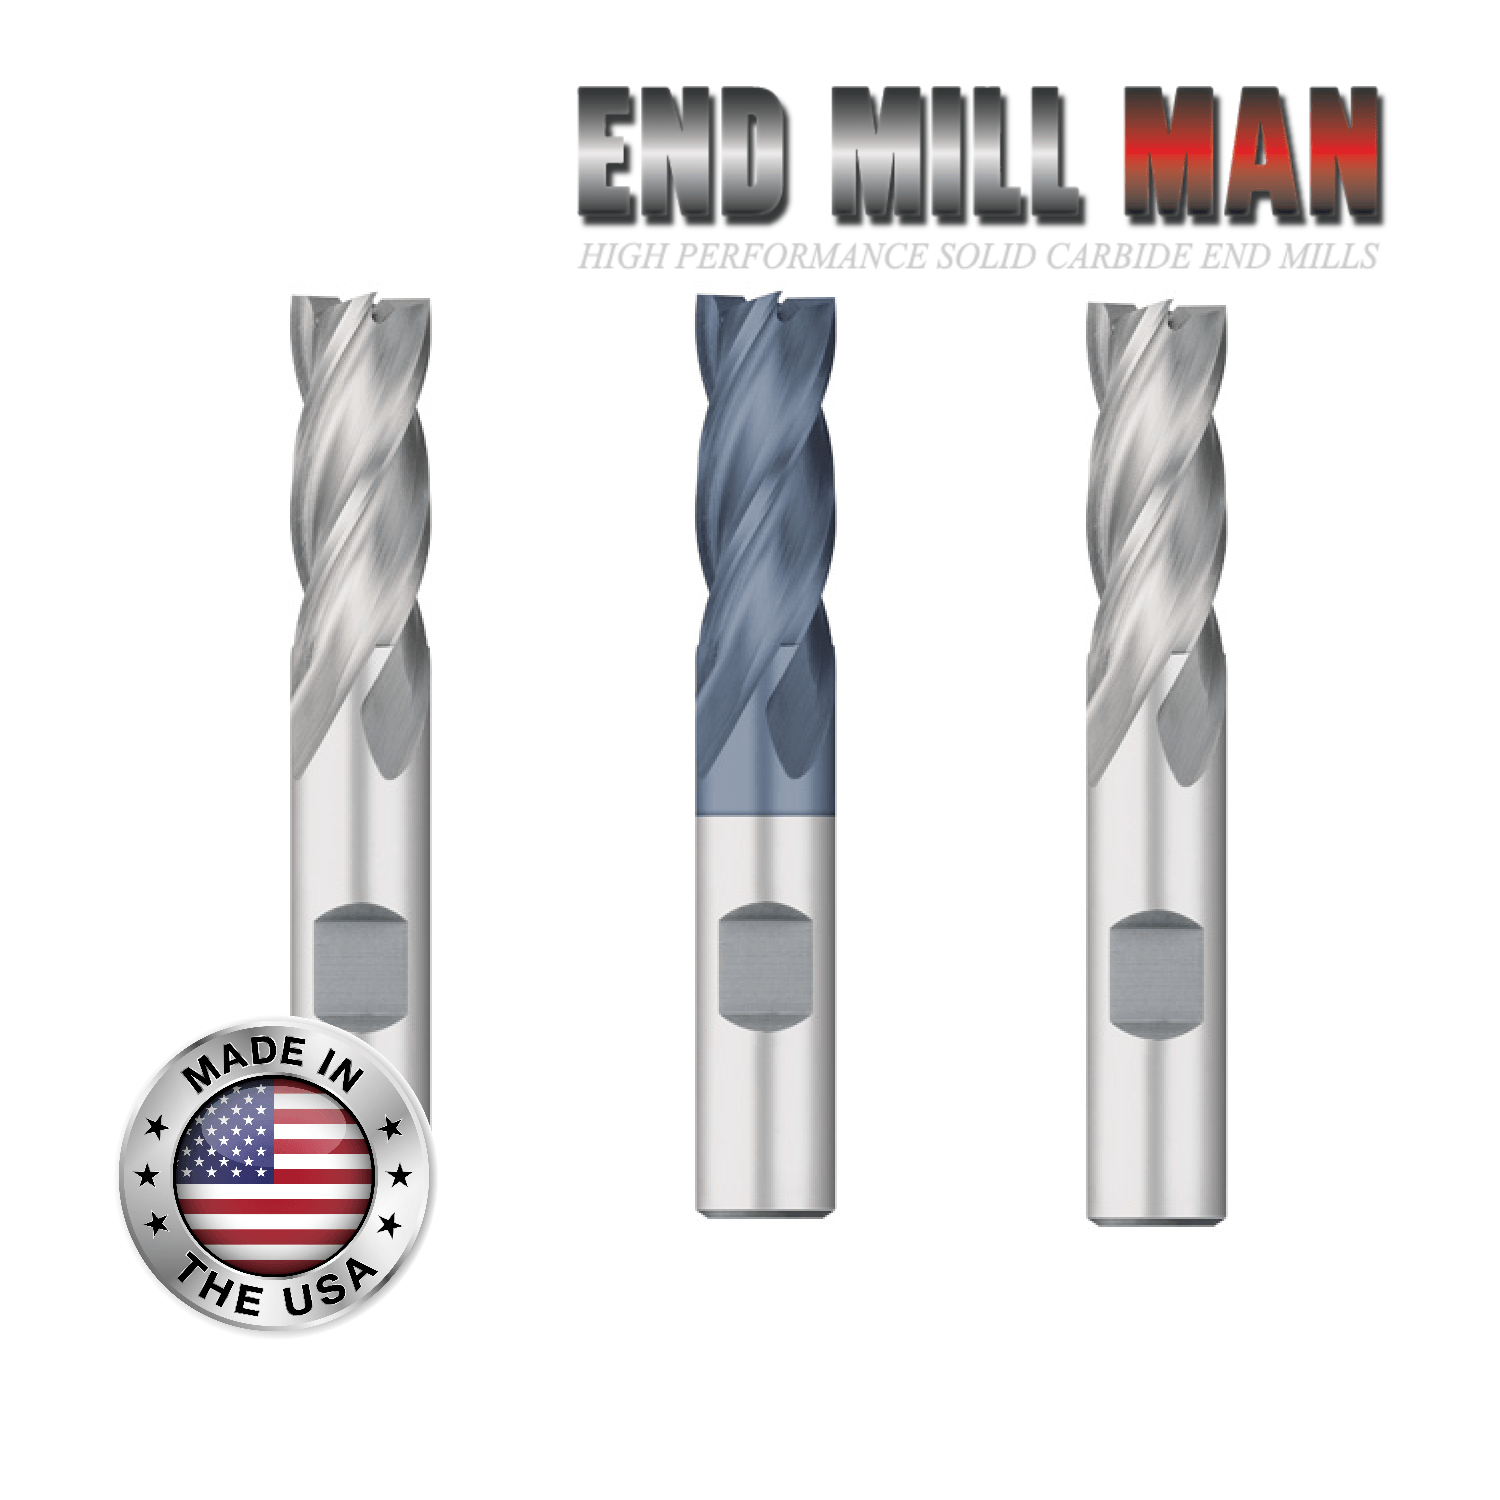 11/16" x 1-5/8" LOC (3 Pack) HSS 4 Flute End Mills (5/8" Shanks) - The End Mill Store 